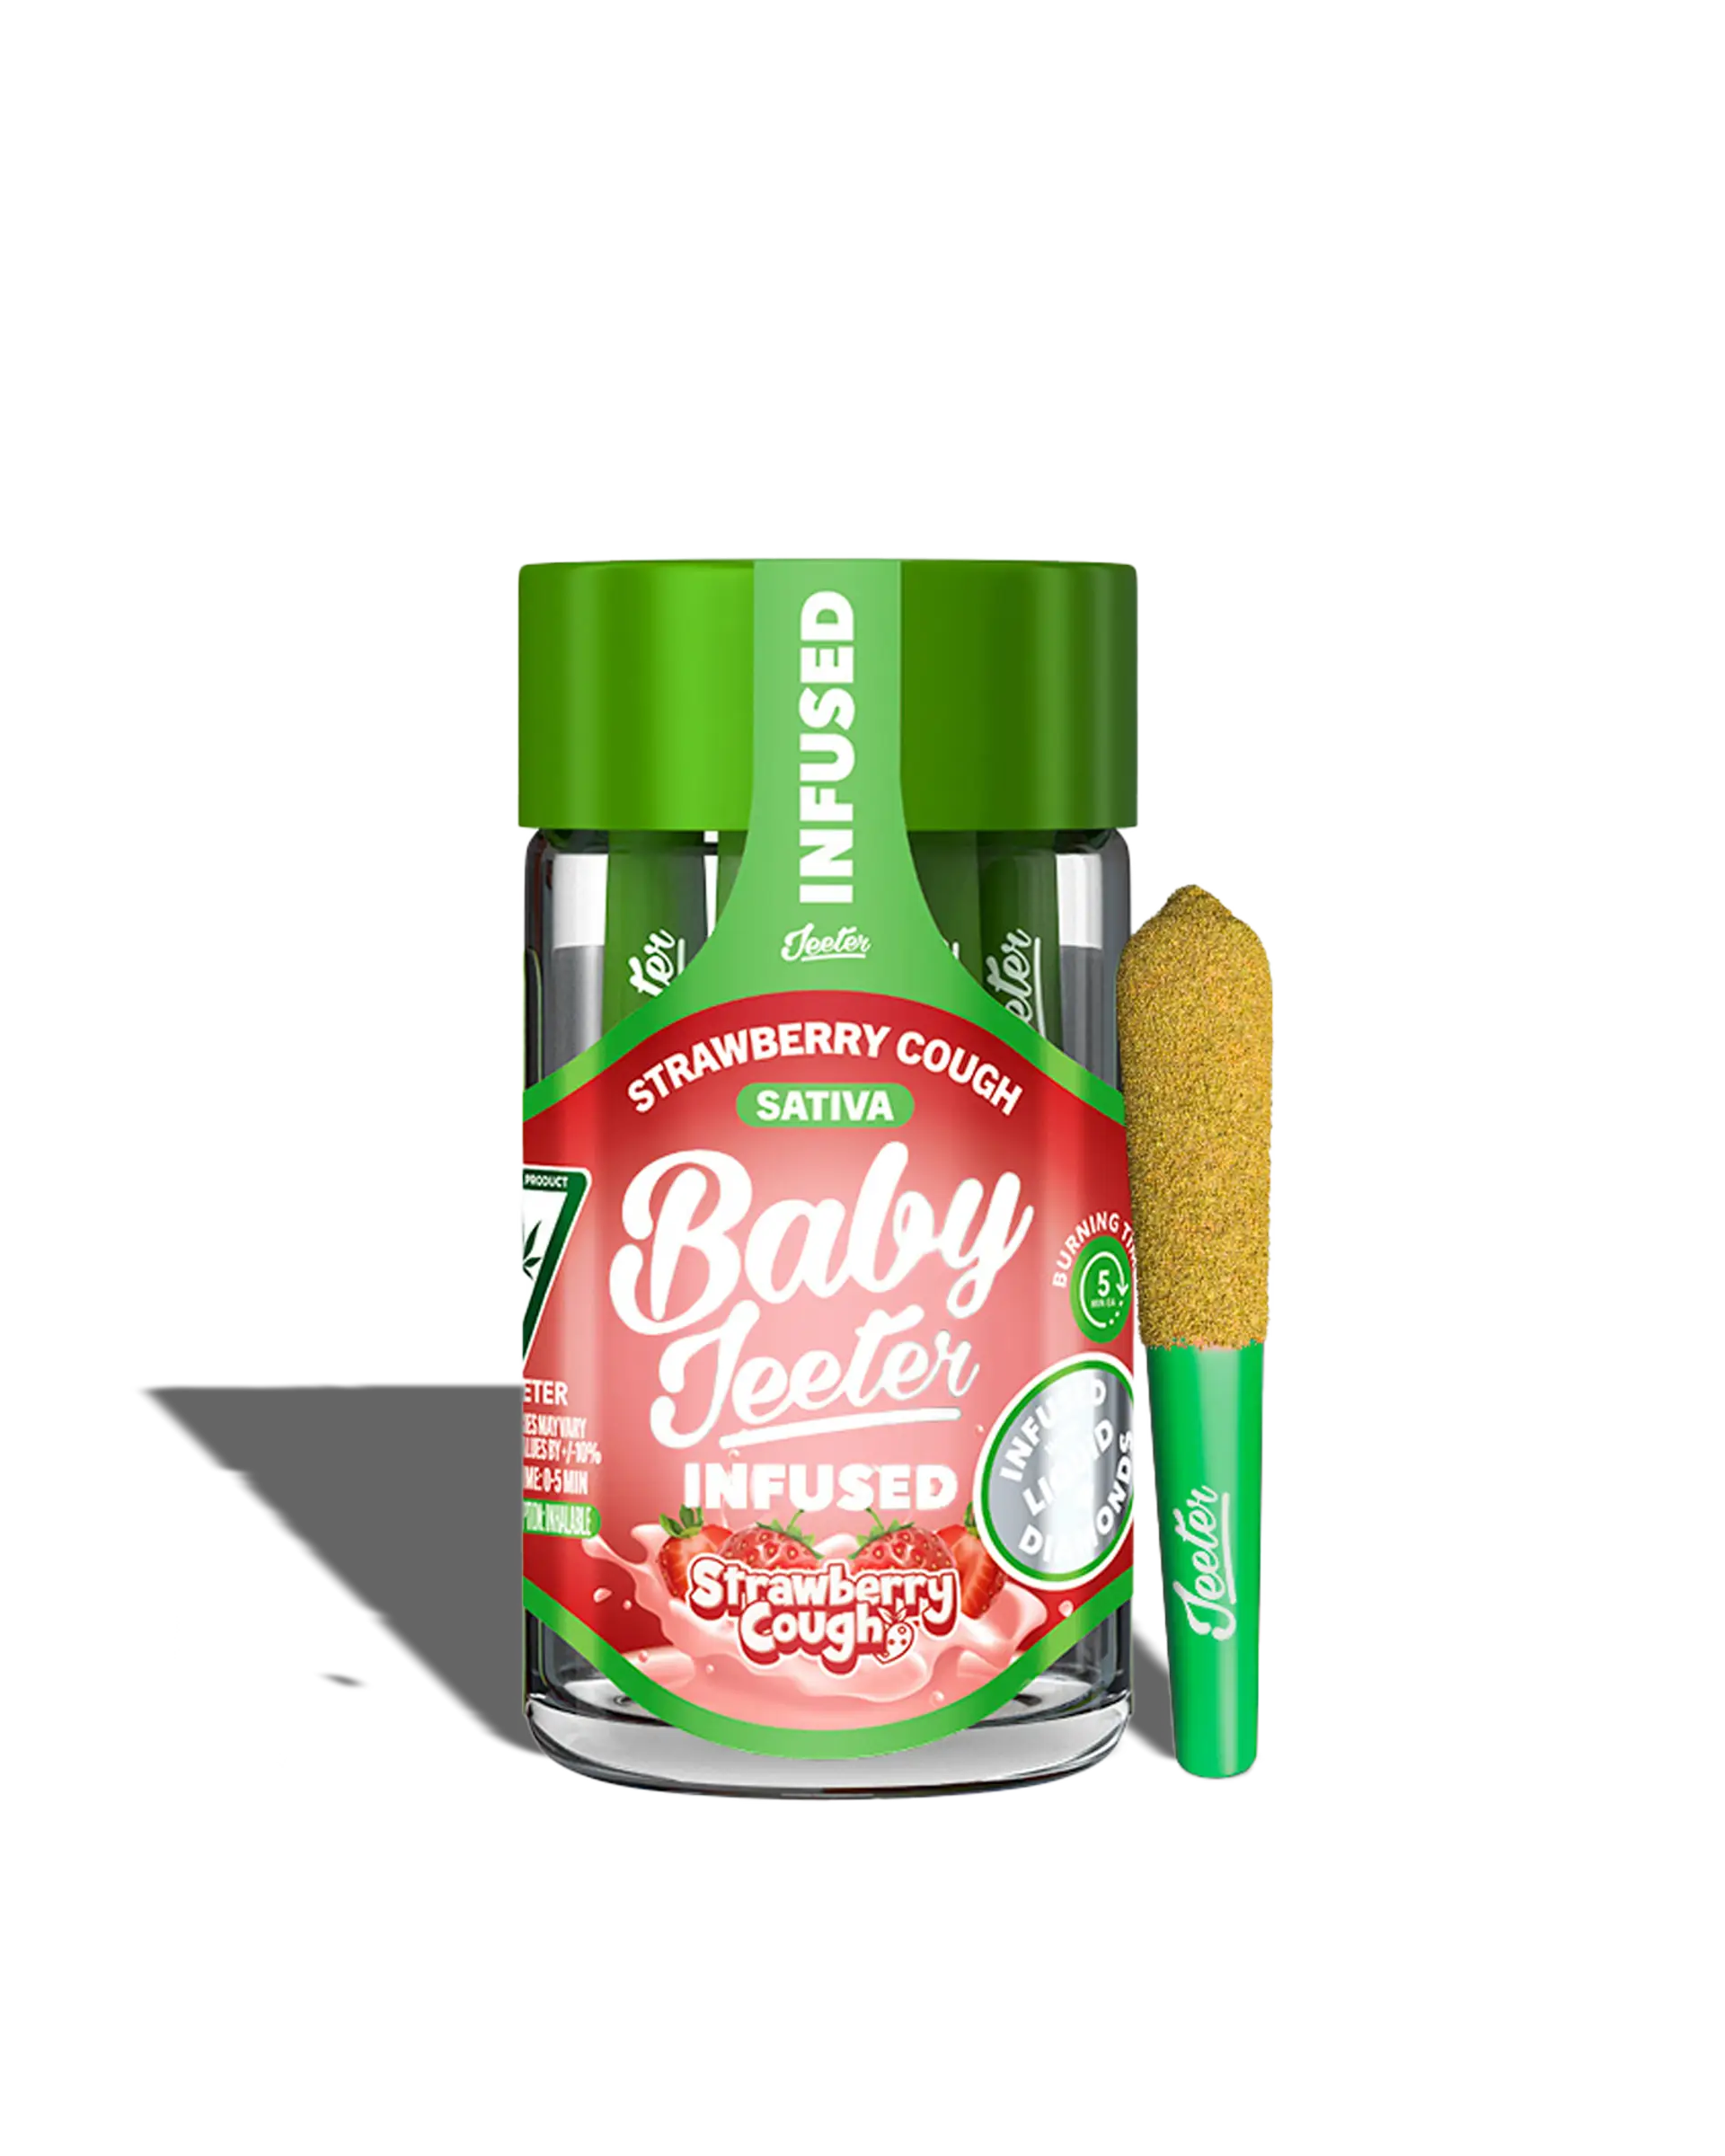 Baby Jeeter Strawberry Cough Infused Preroll 5-pack